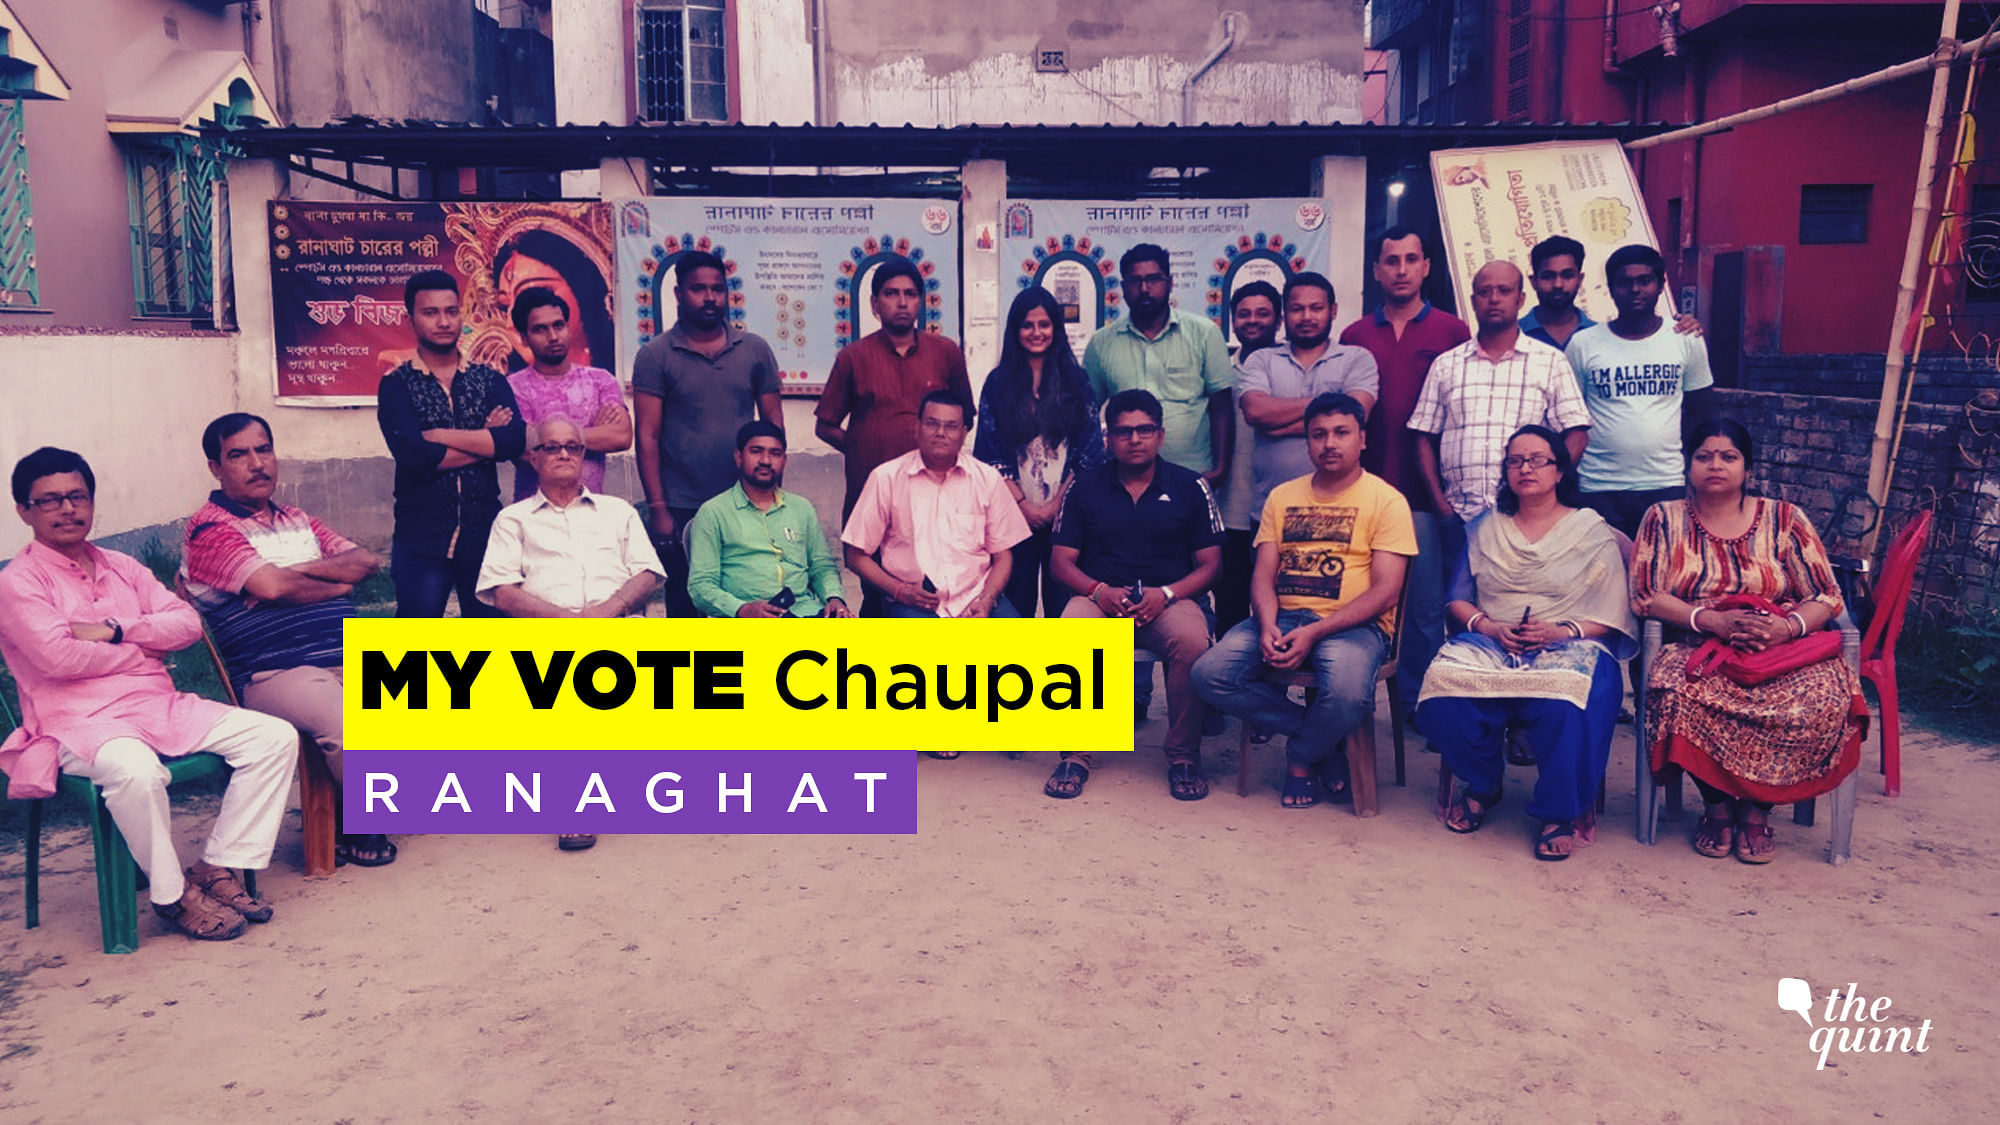 The Quint’s election chaupal travelled to the Ranaghat constituency in the Nadia district of Bengal- a border district with Bangladesh.